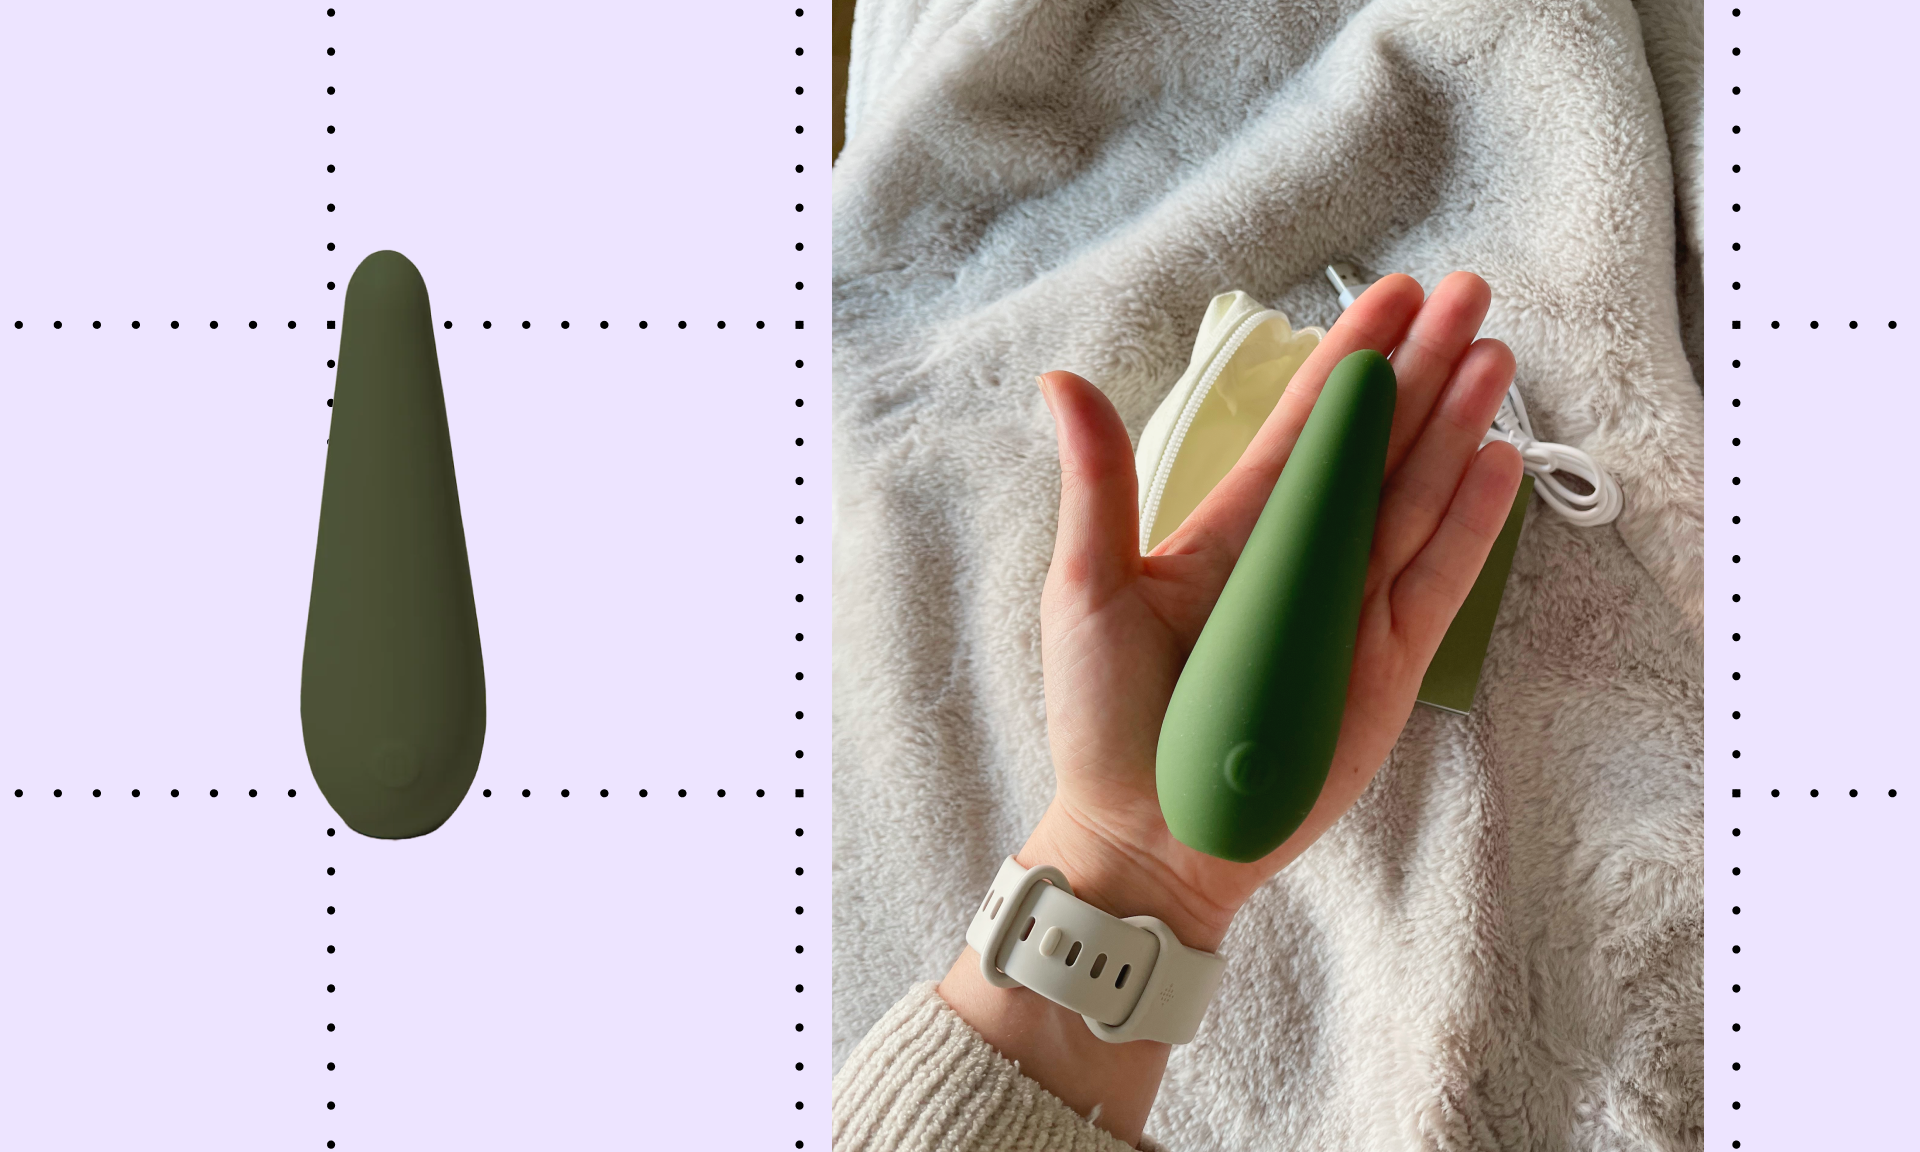 maude vibrator in forest green color